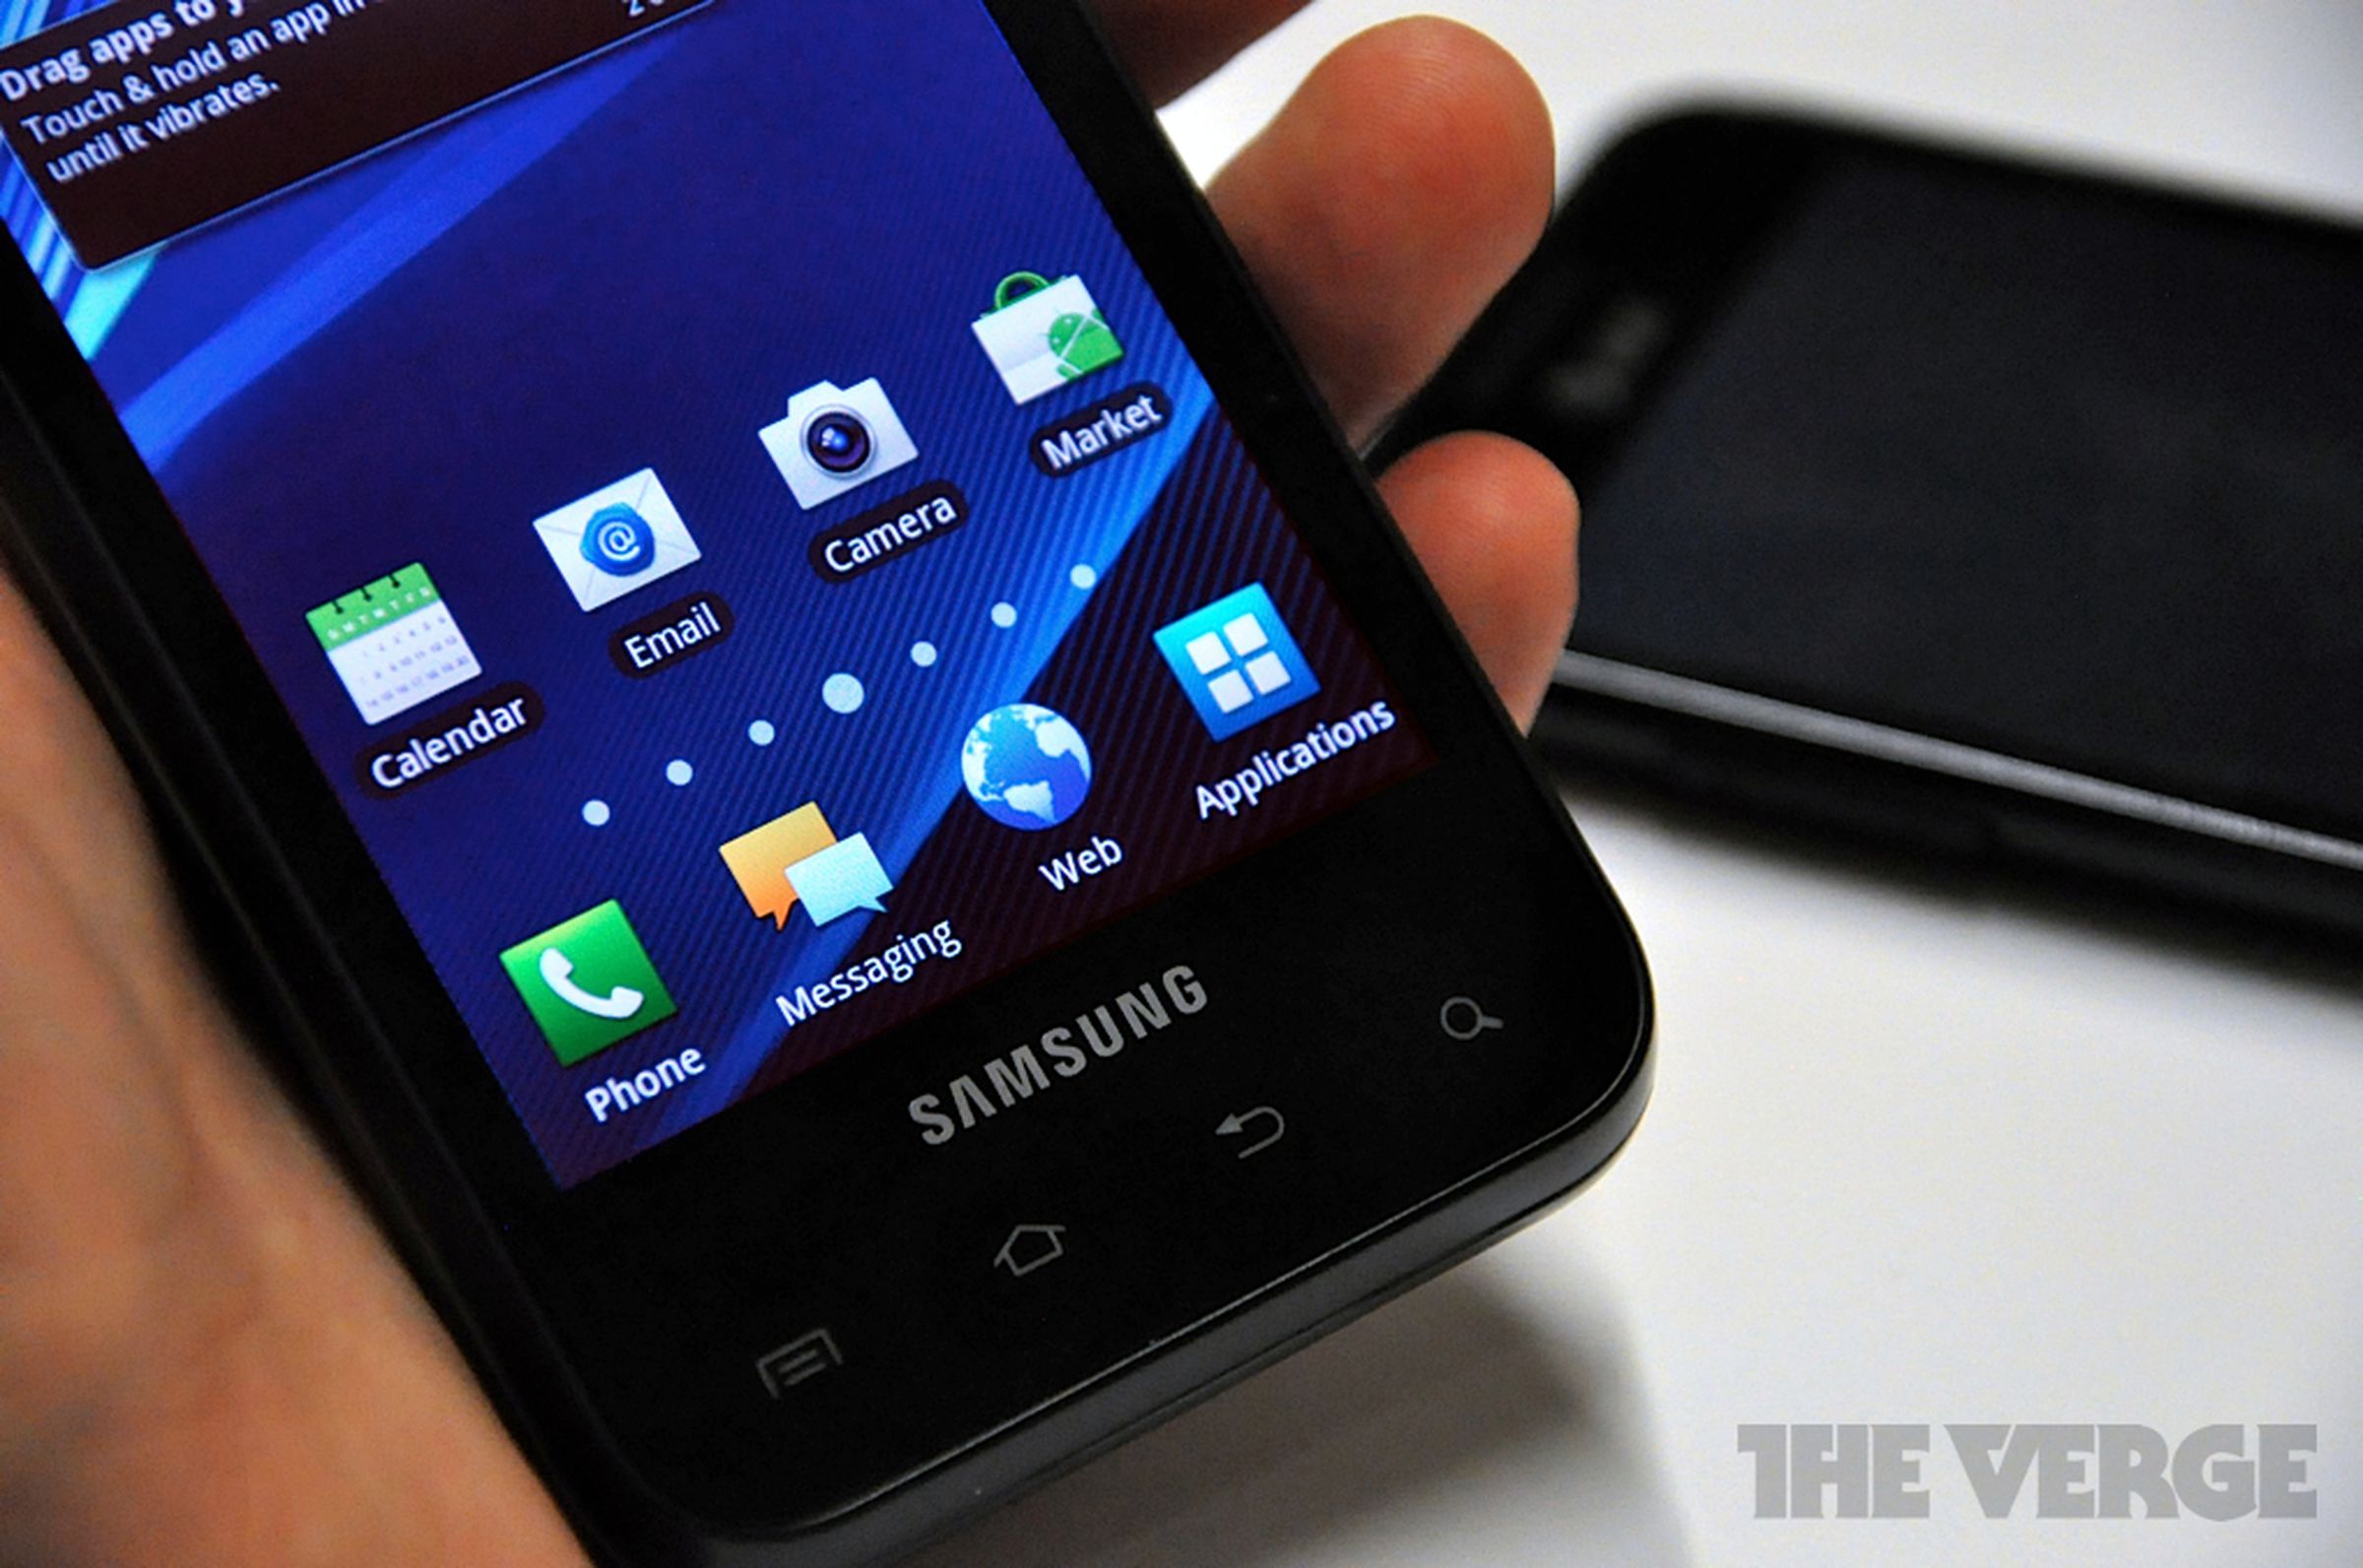 Samsung Captivate Glide and Double Time hands-on pictures